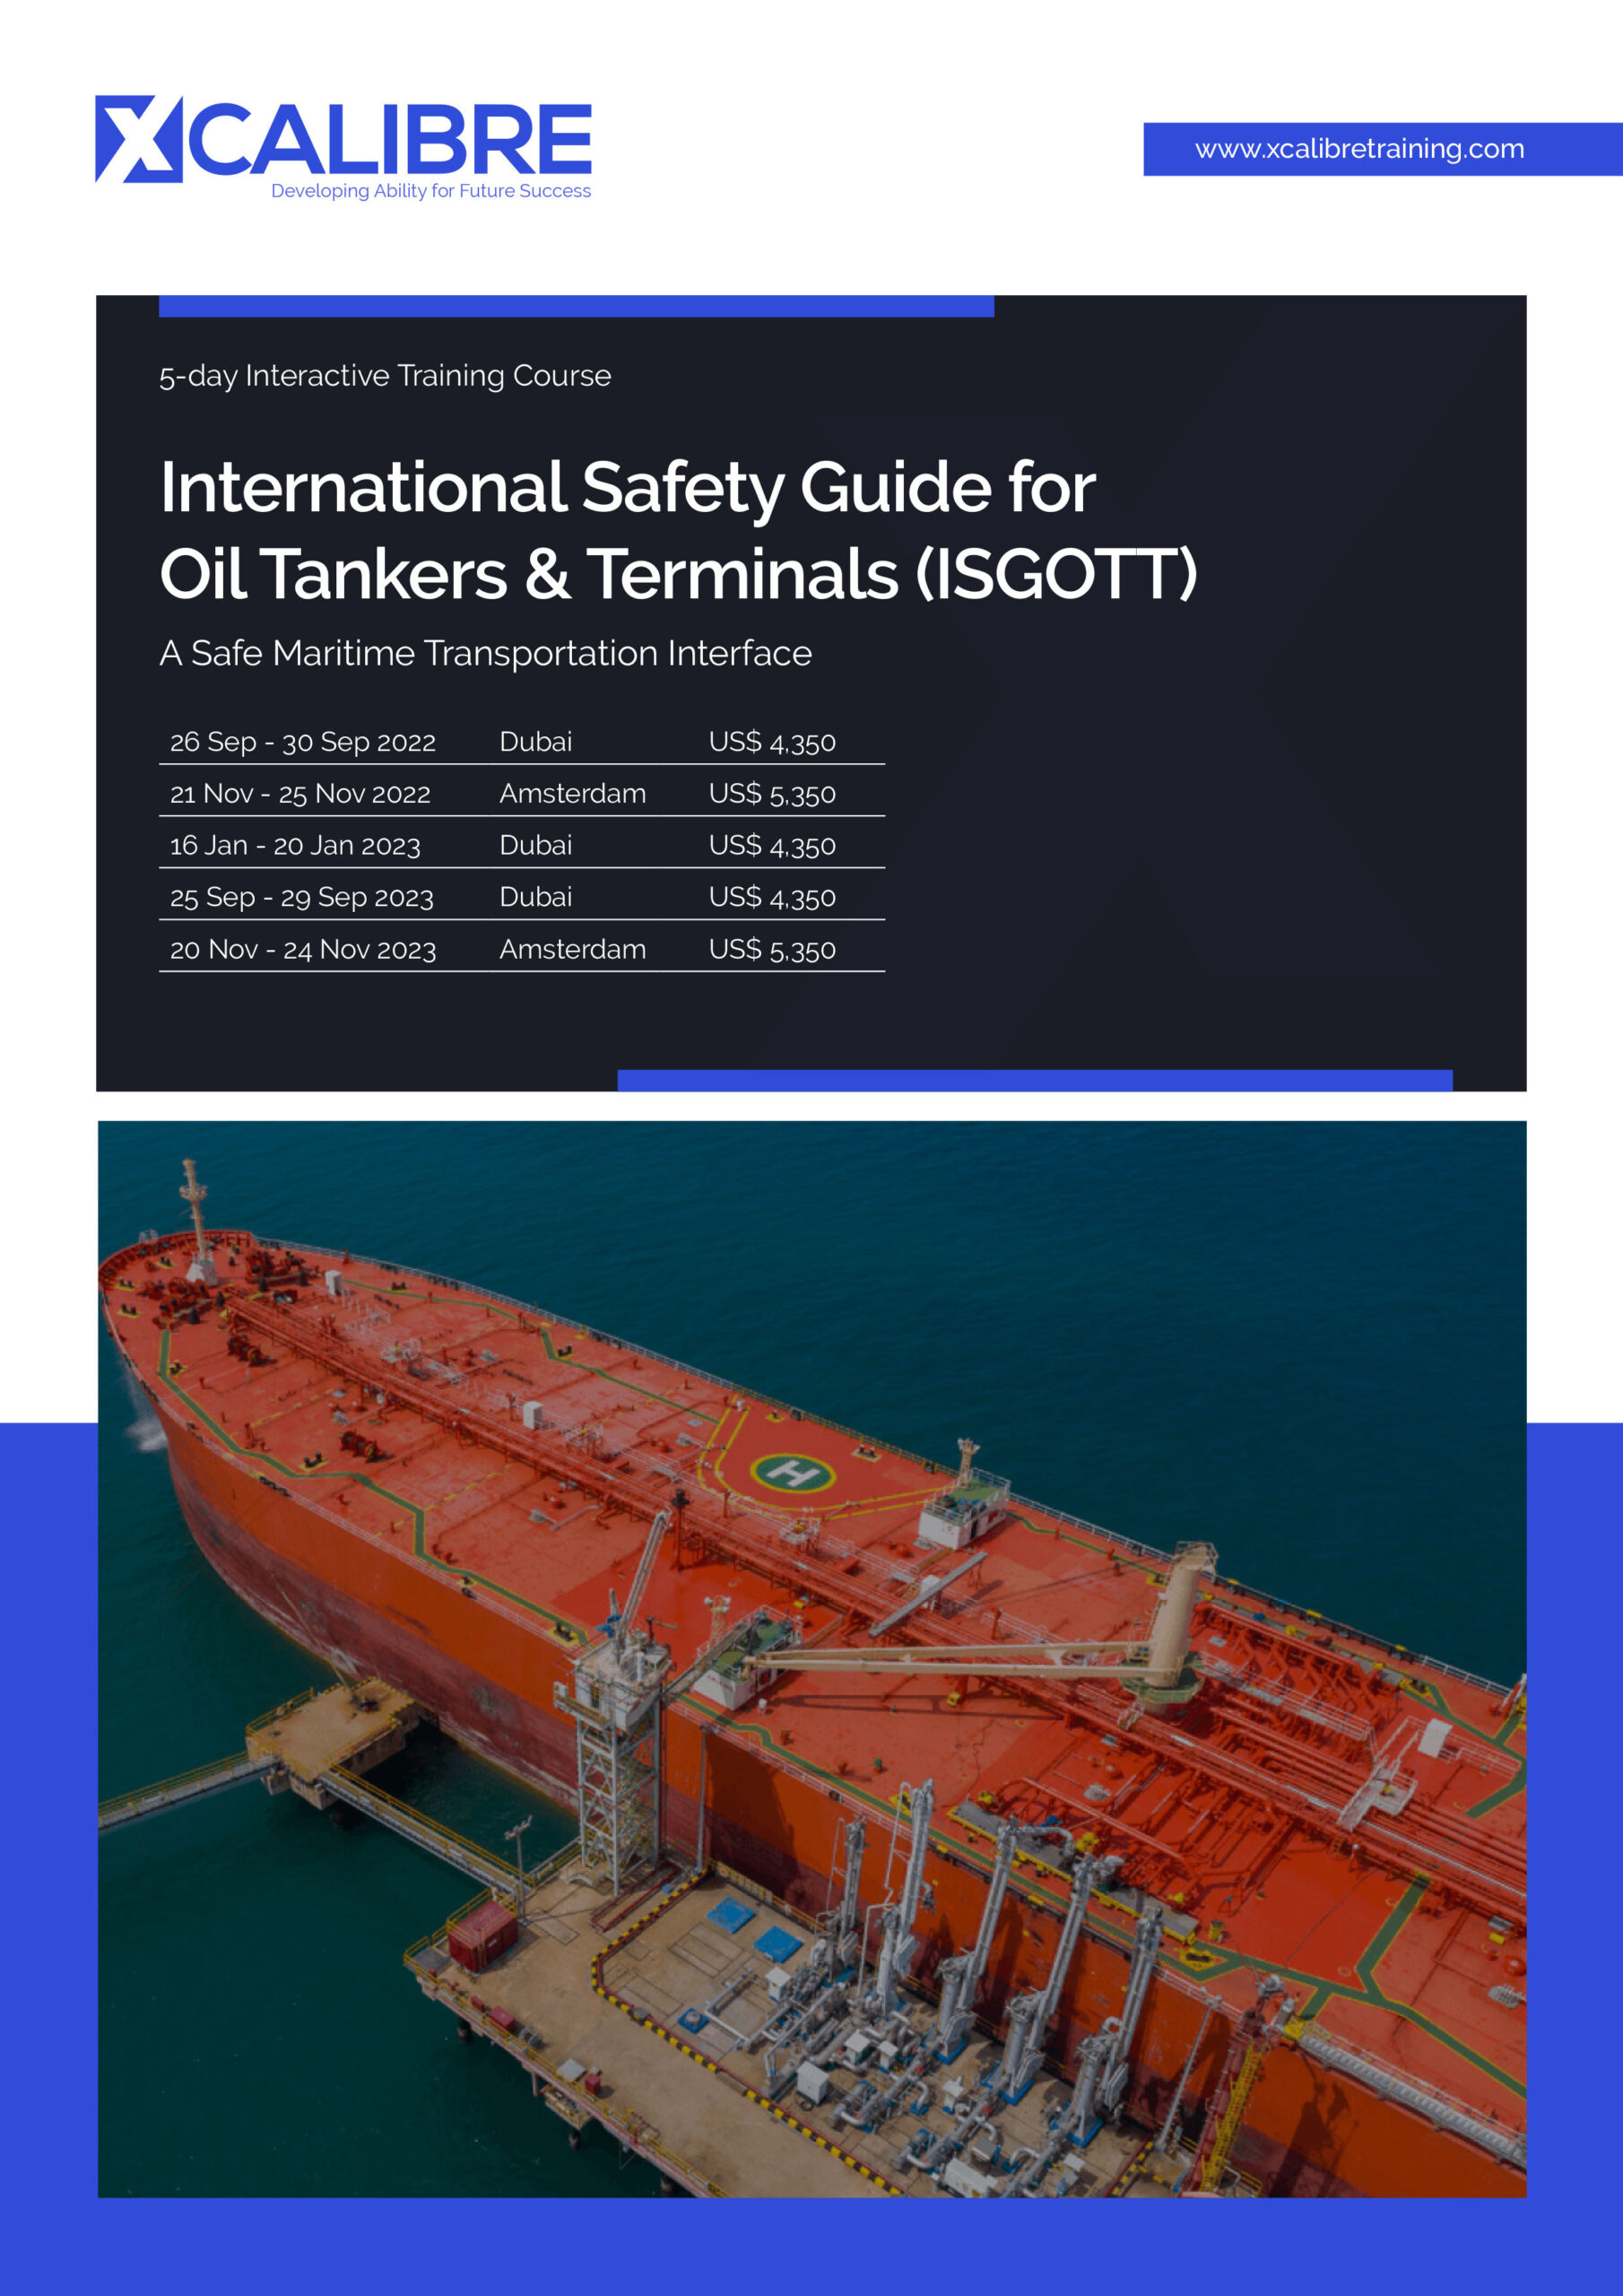 International Safety Guide for Oil Tankers & Terminals (ISGOTT) Brochure